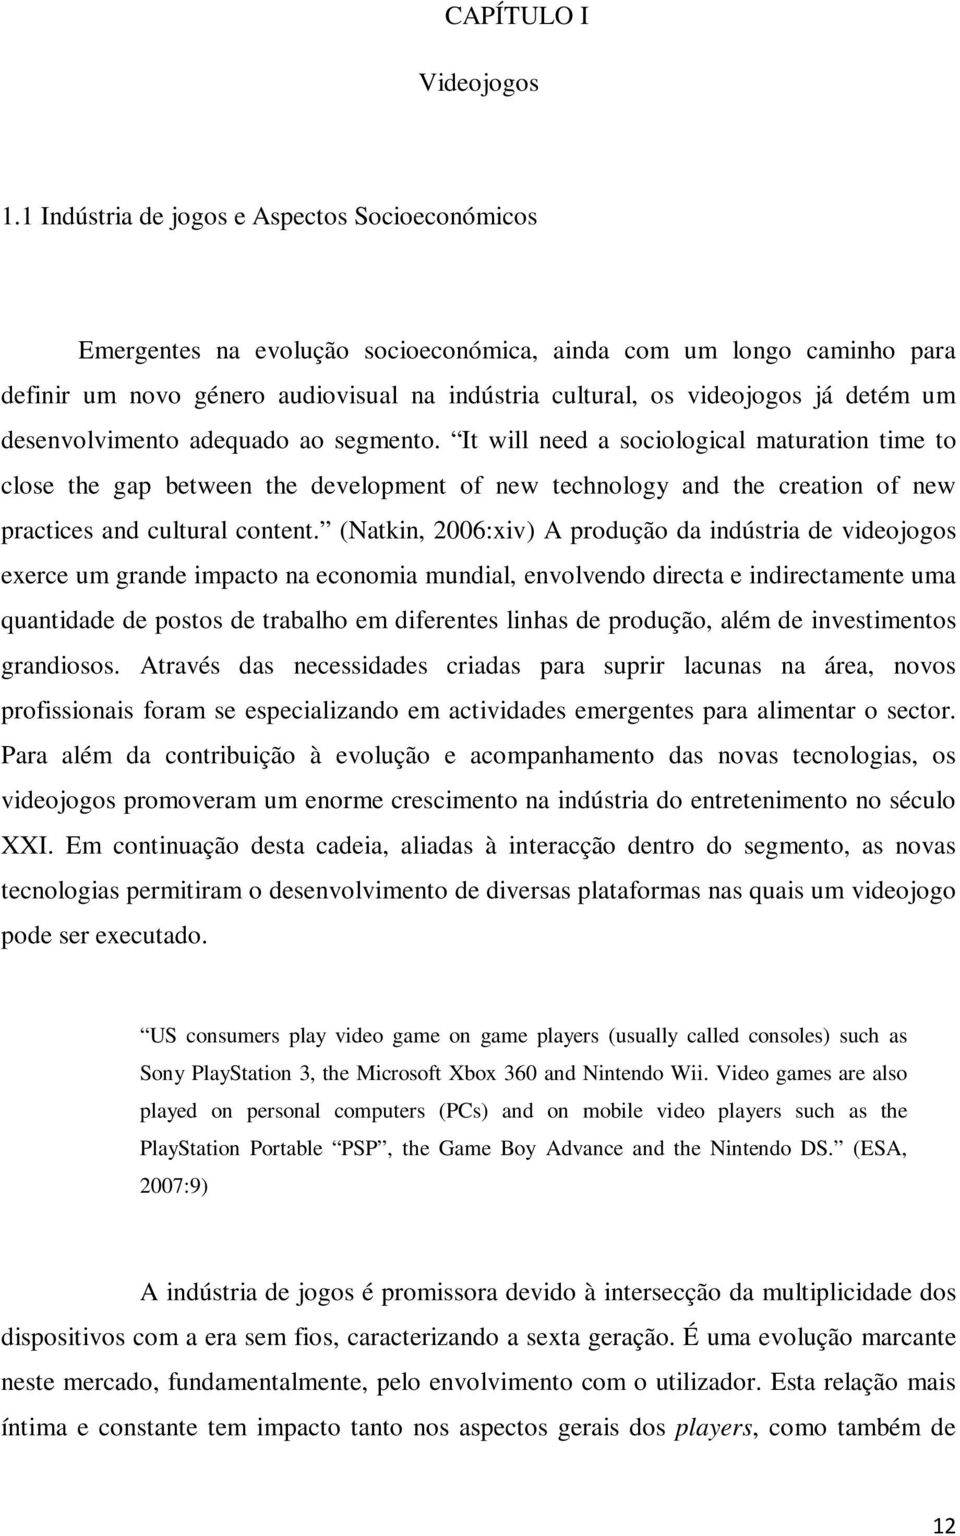 um desenvolvimento adequado ao segmento. It will need a sociological maturation time to close the gap between the development of new technology and the creation of new practices and cultural content.